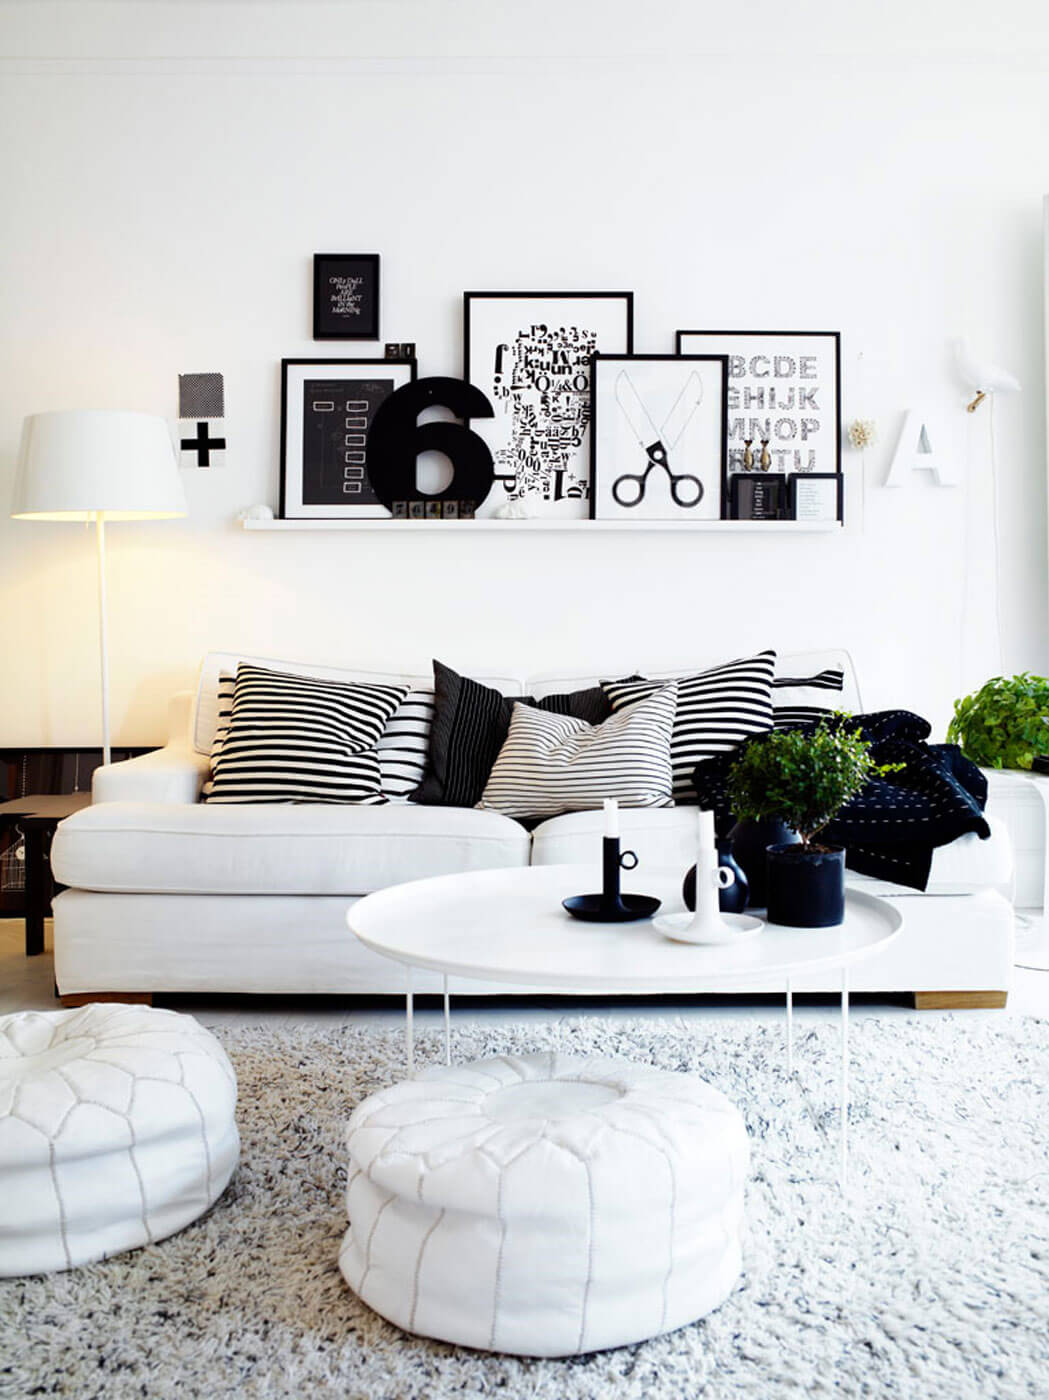 20 Lovely Decor Ideas for Adding Impact Above The Sofa